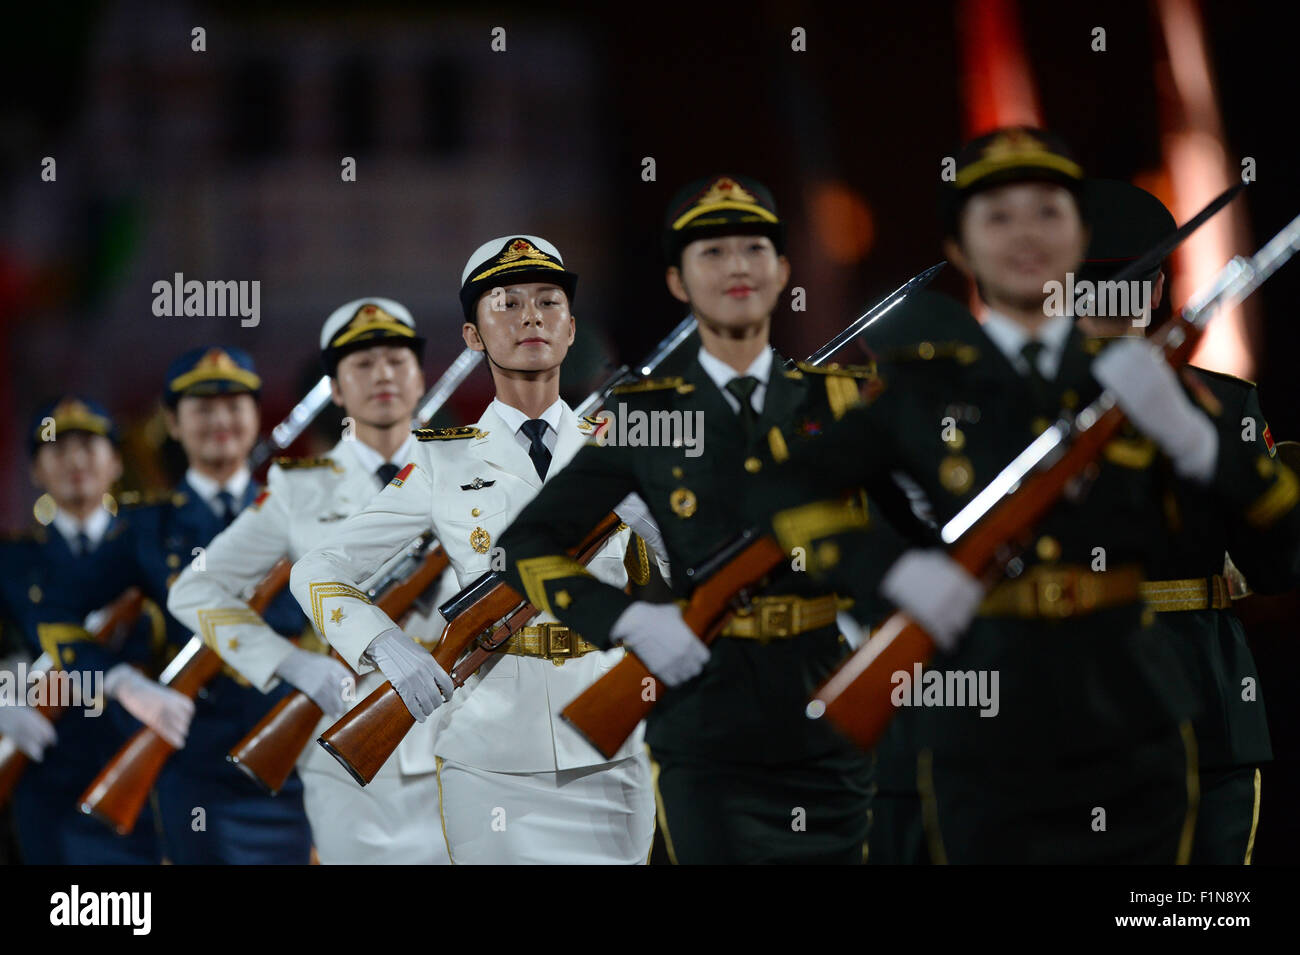 Moscow, Russia. 4th Sep, 2015. Women guards of honor of China's People's Liberation Army perform during general rehearsal of Kremlin Military Tattoo 'Spasskaya Bashnya' on Red square in Moscow, Russia, Sep. 4, 2015. © Pavel Bednyakov/Xinhua/Alamy Live News Stock Photo